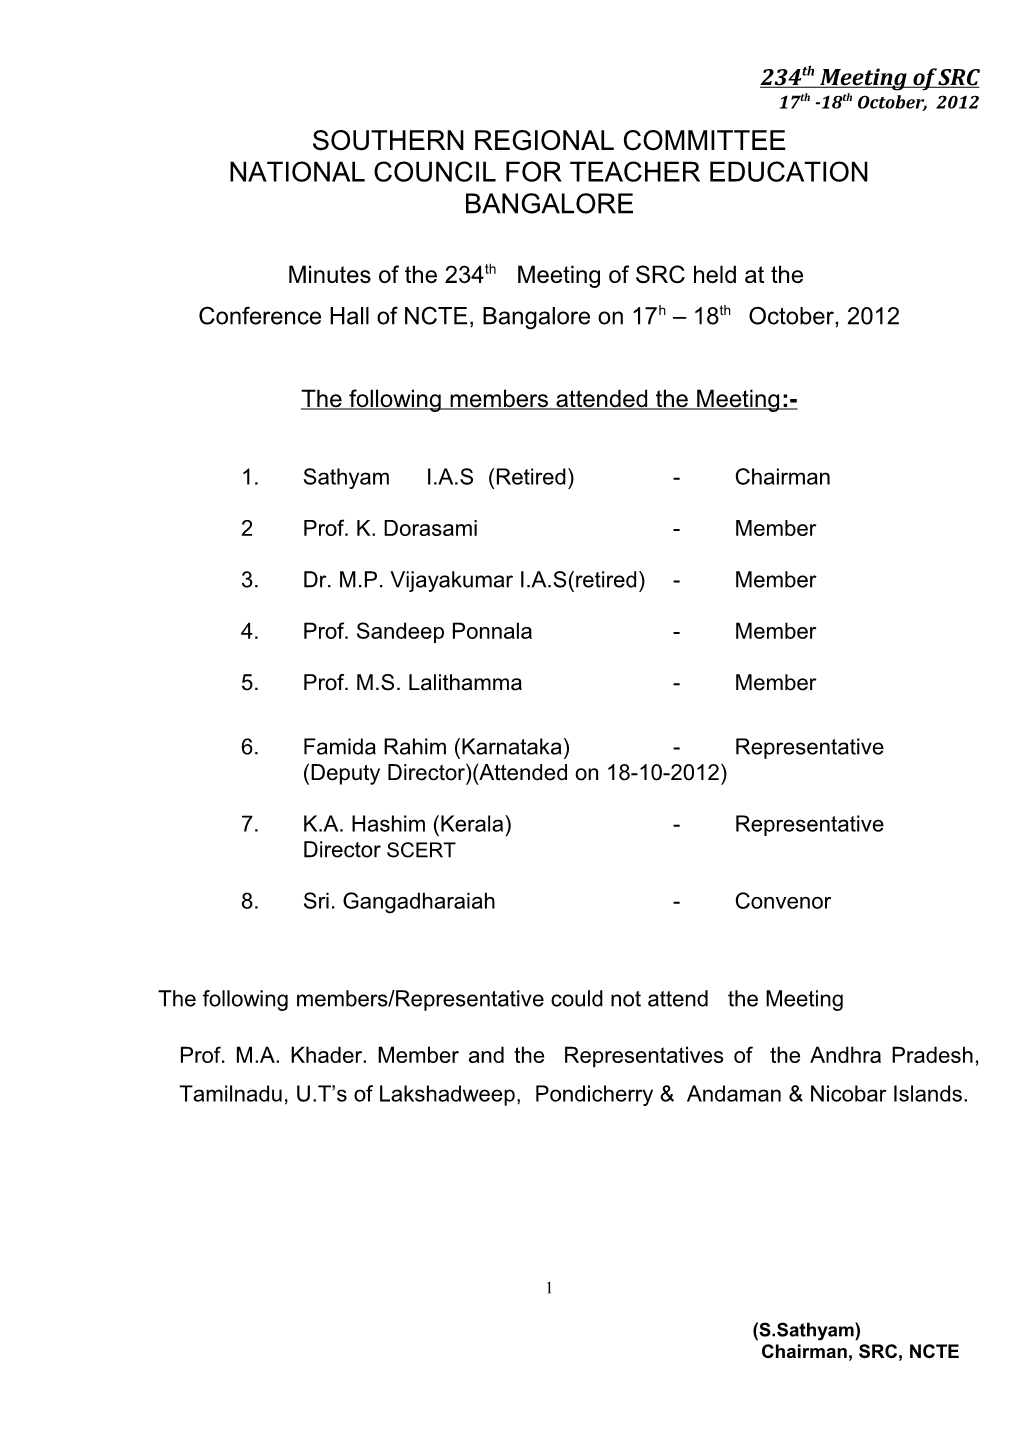 MINUTES of 234Th MEETING of SRC-NCTE